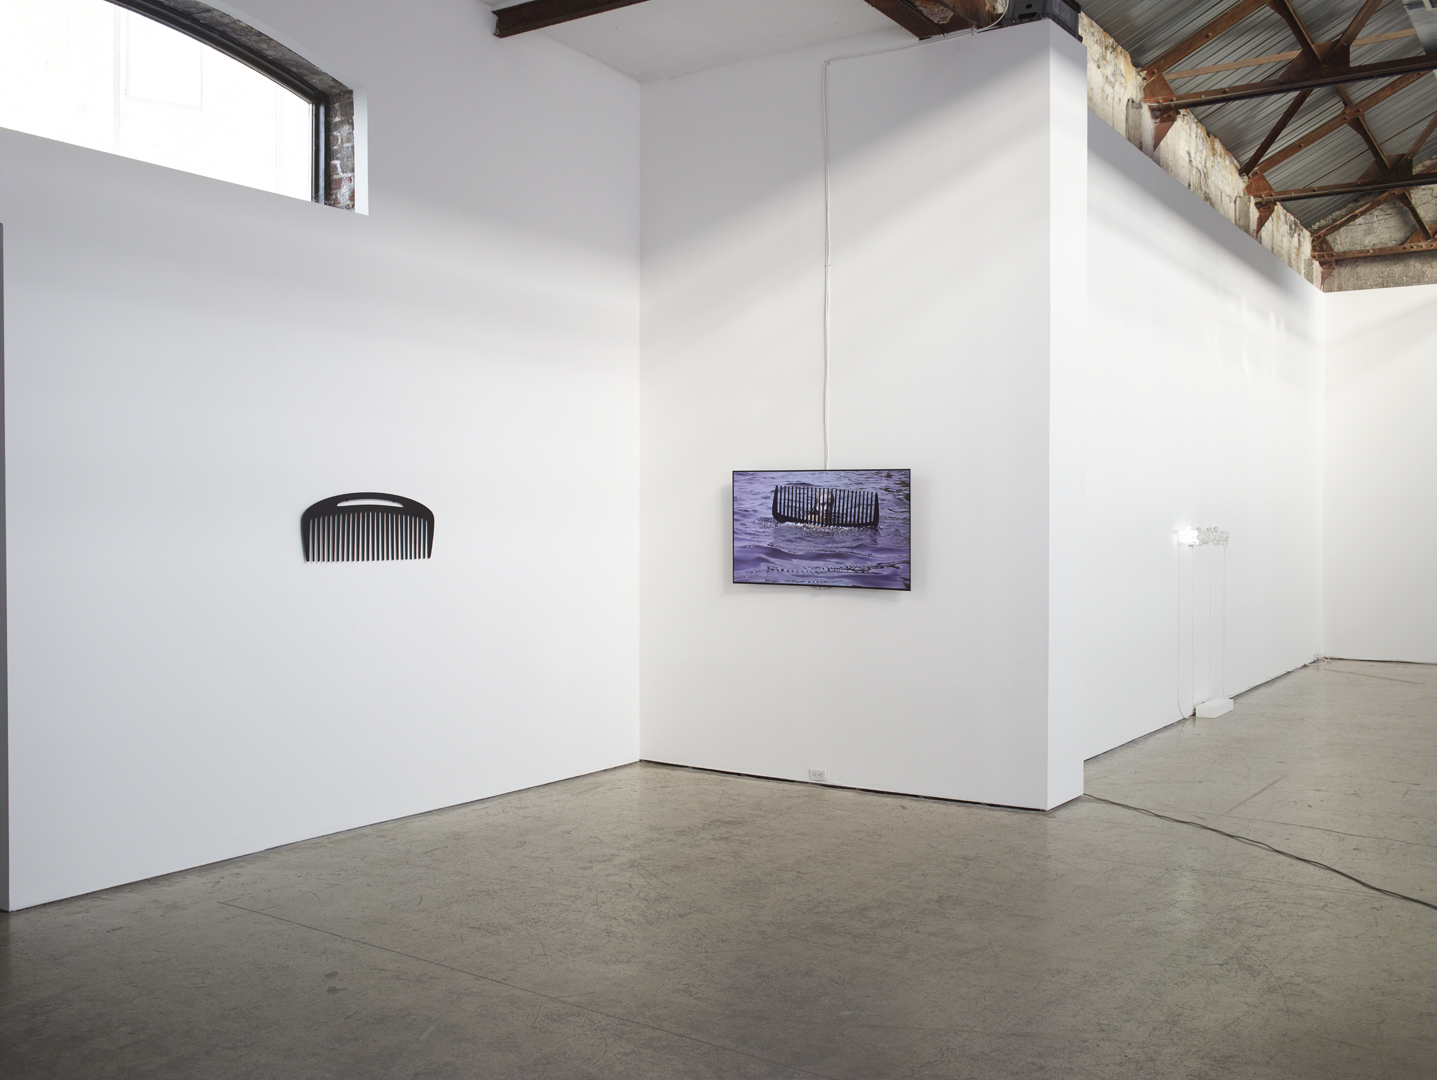 Installation View 2 text, combs wheels & poems 2015